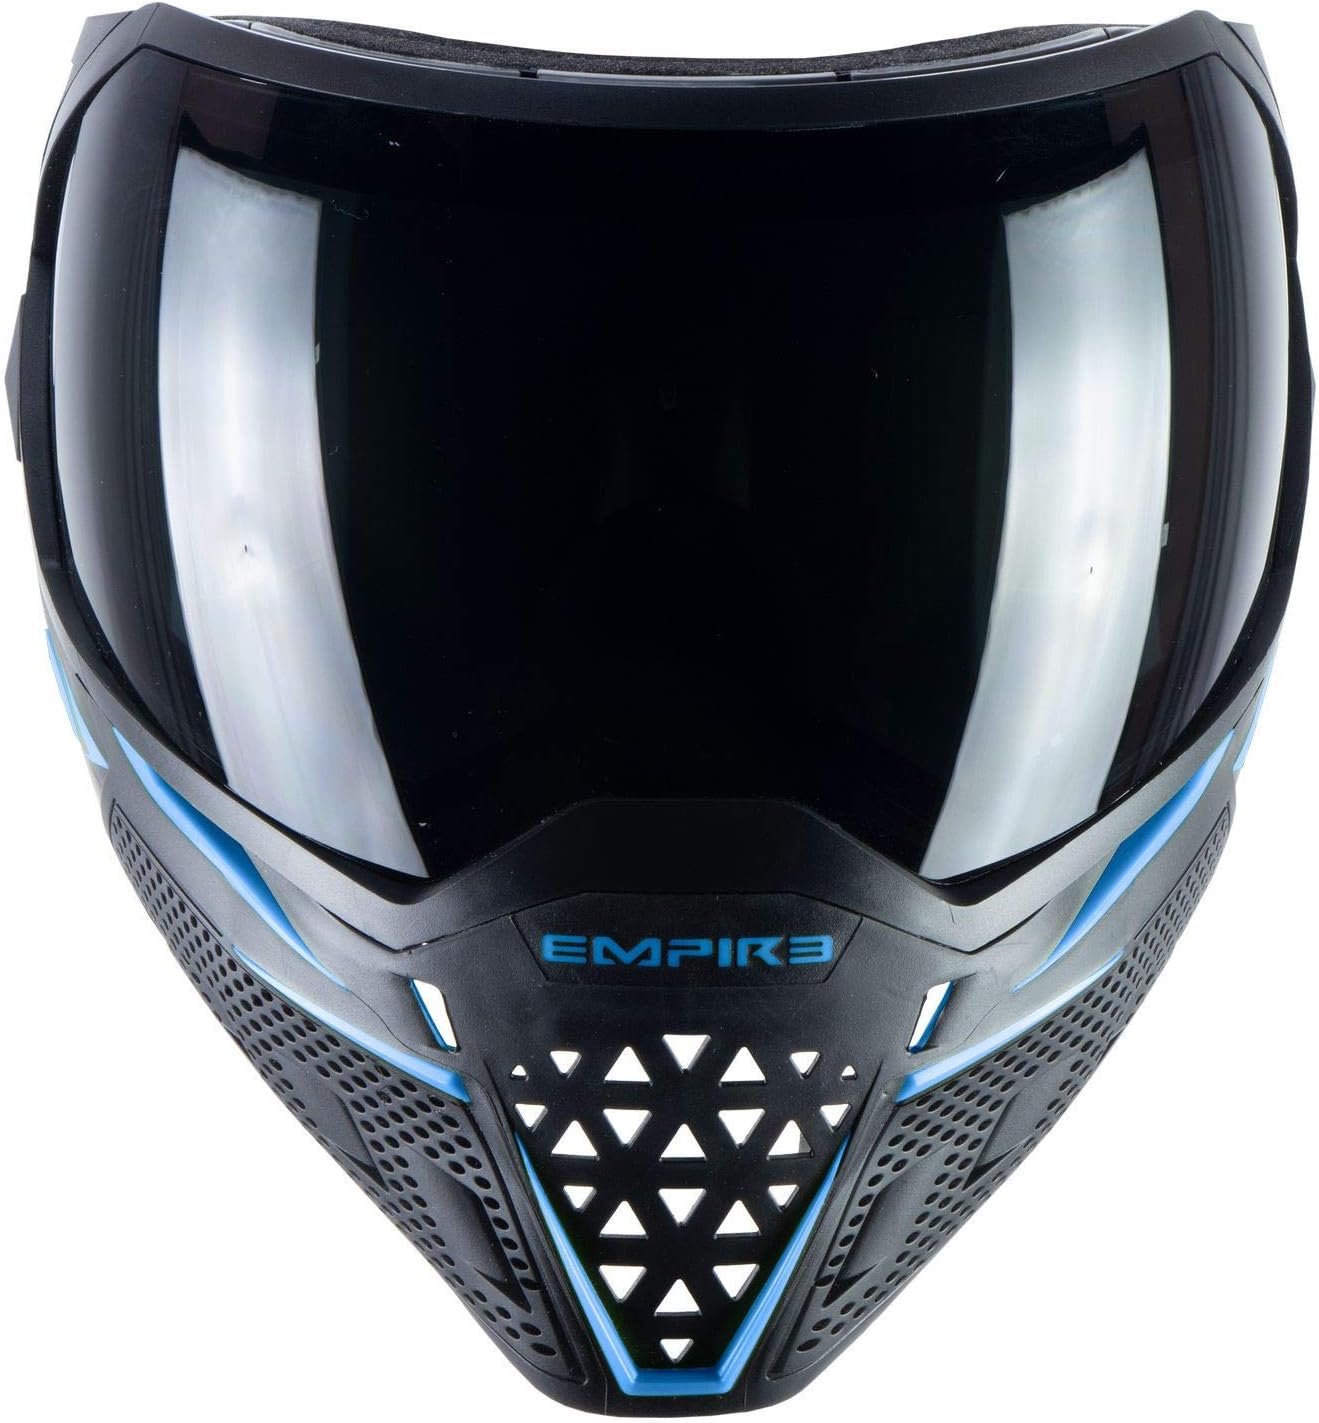 Empire EVS Goggle - Black/Navy Blue - Thermal Ninja / Thermal Clear